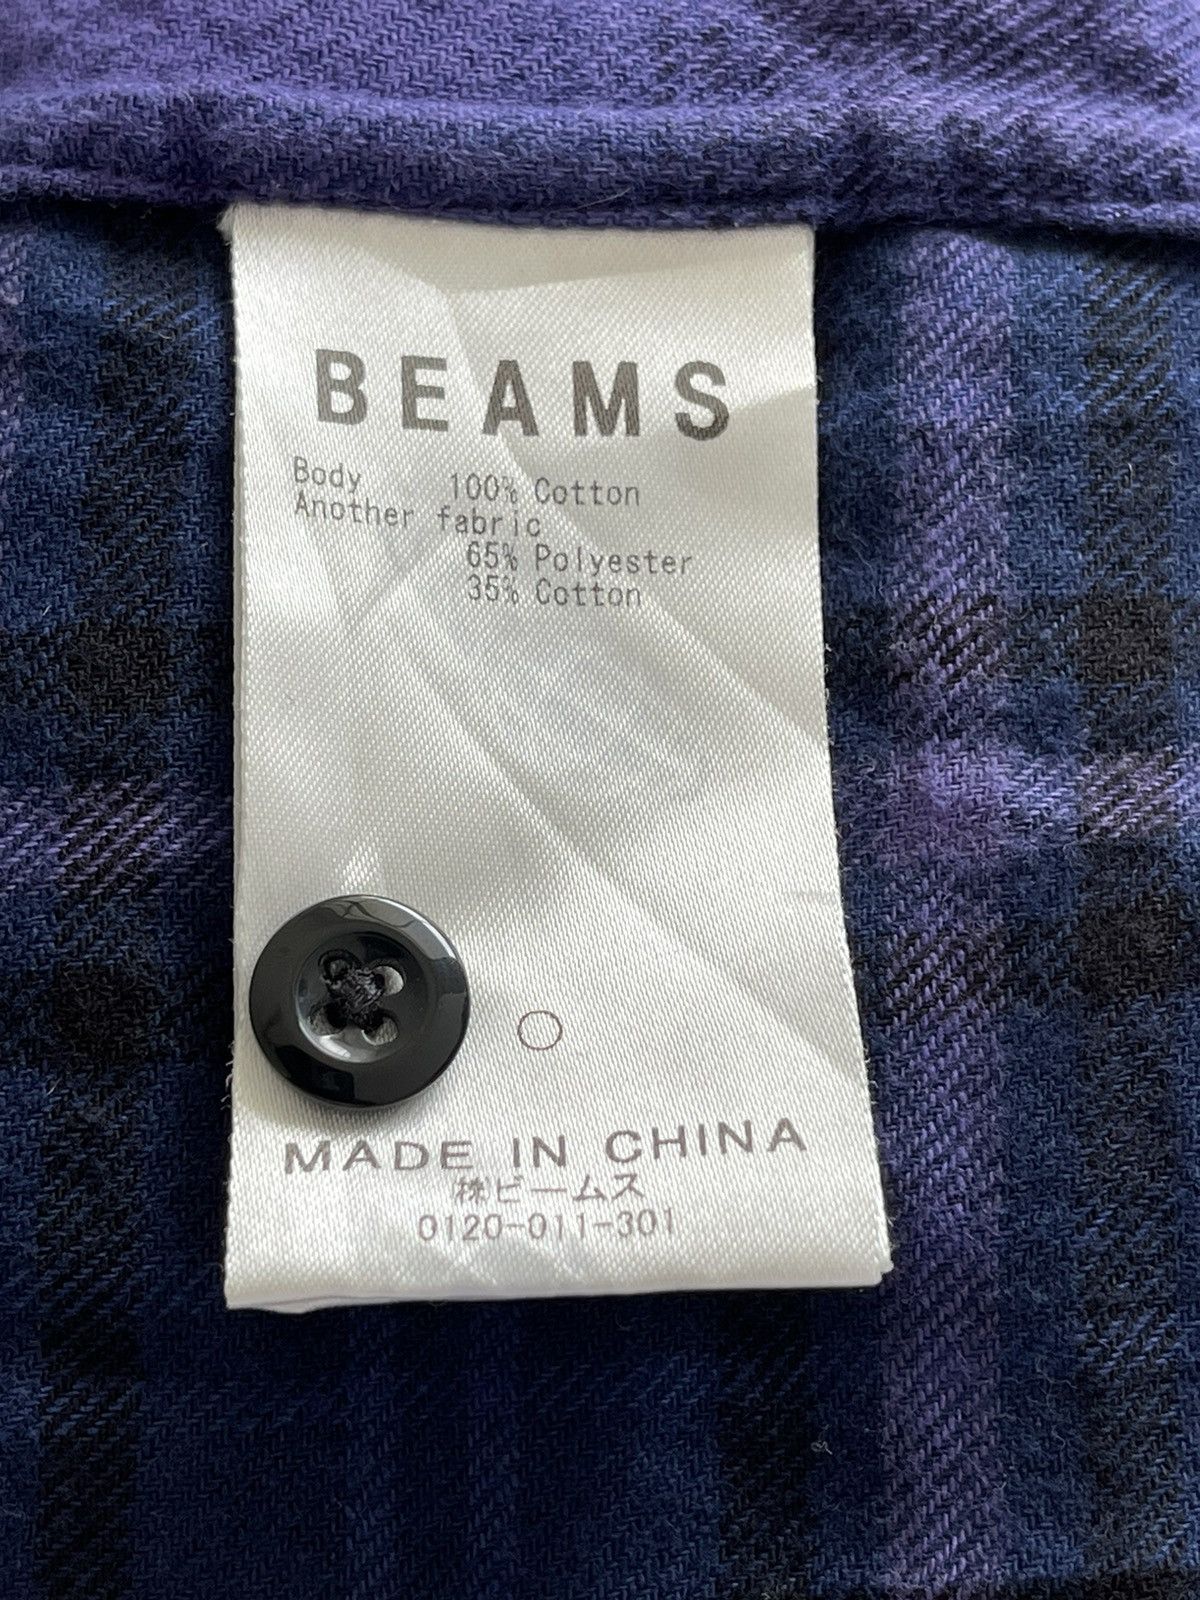 Beams Multicolor Flannel inspired Needles - 4